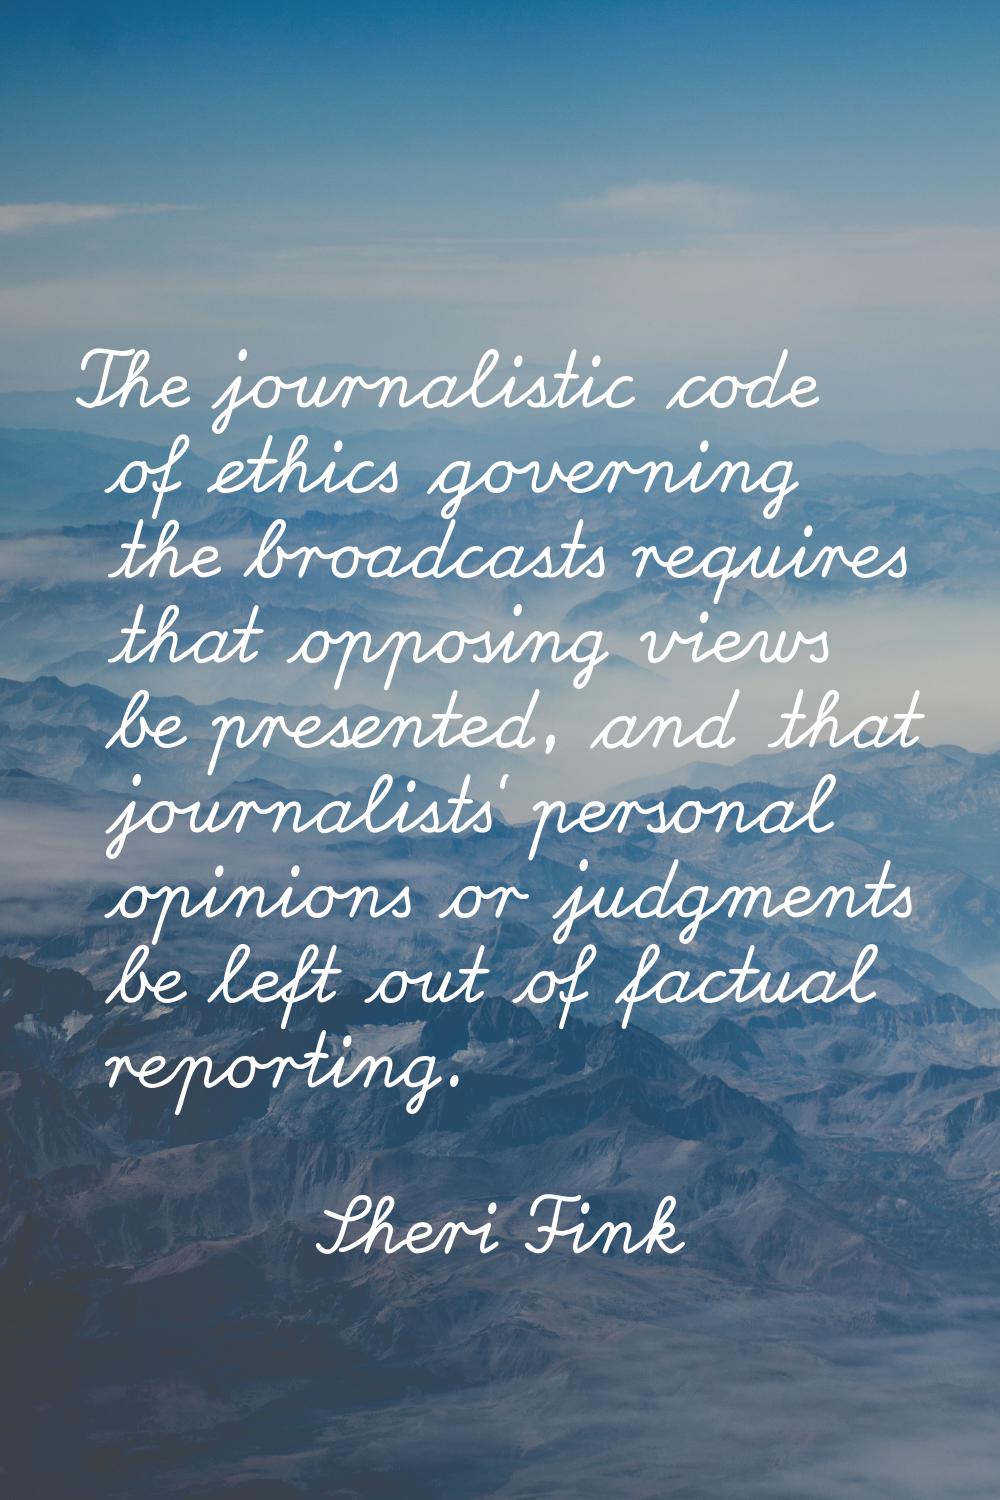 The journalistic code of ethics governing the broadcasts requires that opposing views be presented,